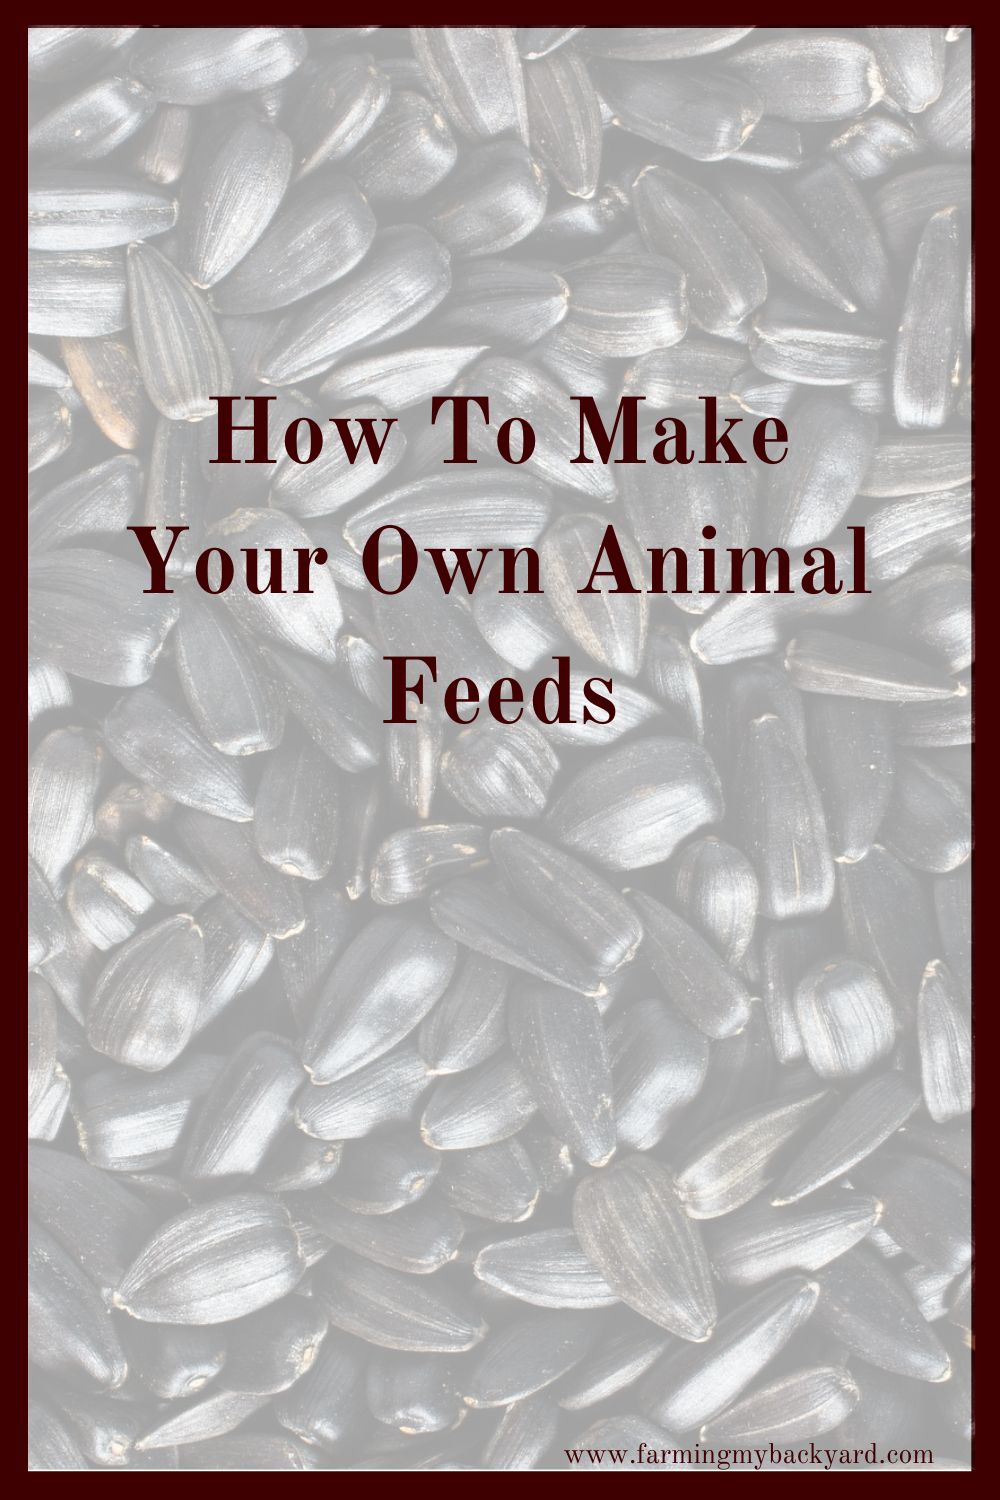 How To Make Your Own Animal Feeds - Farming My Backyard